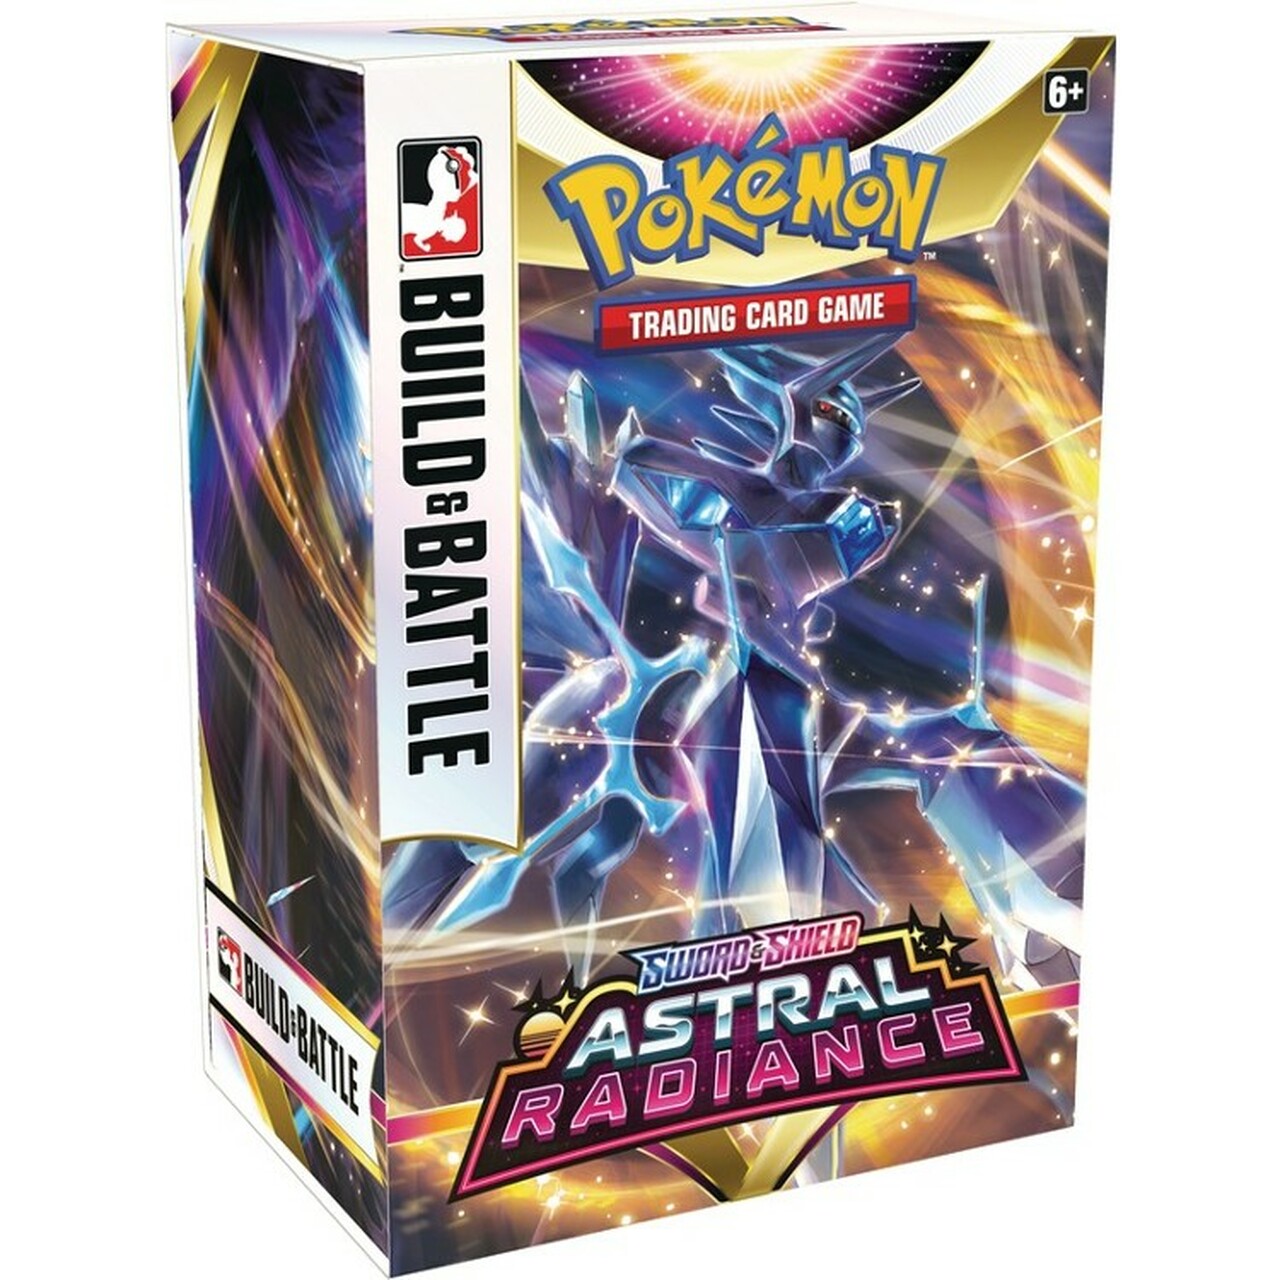 The One Stop Shop Comics & Games Sword & Shield: Astral Radiance - Build & Battle Box Pokemon